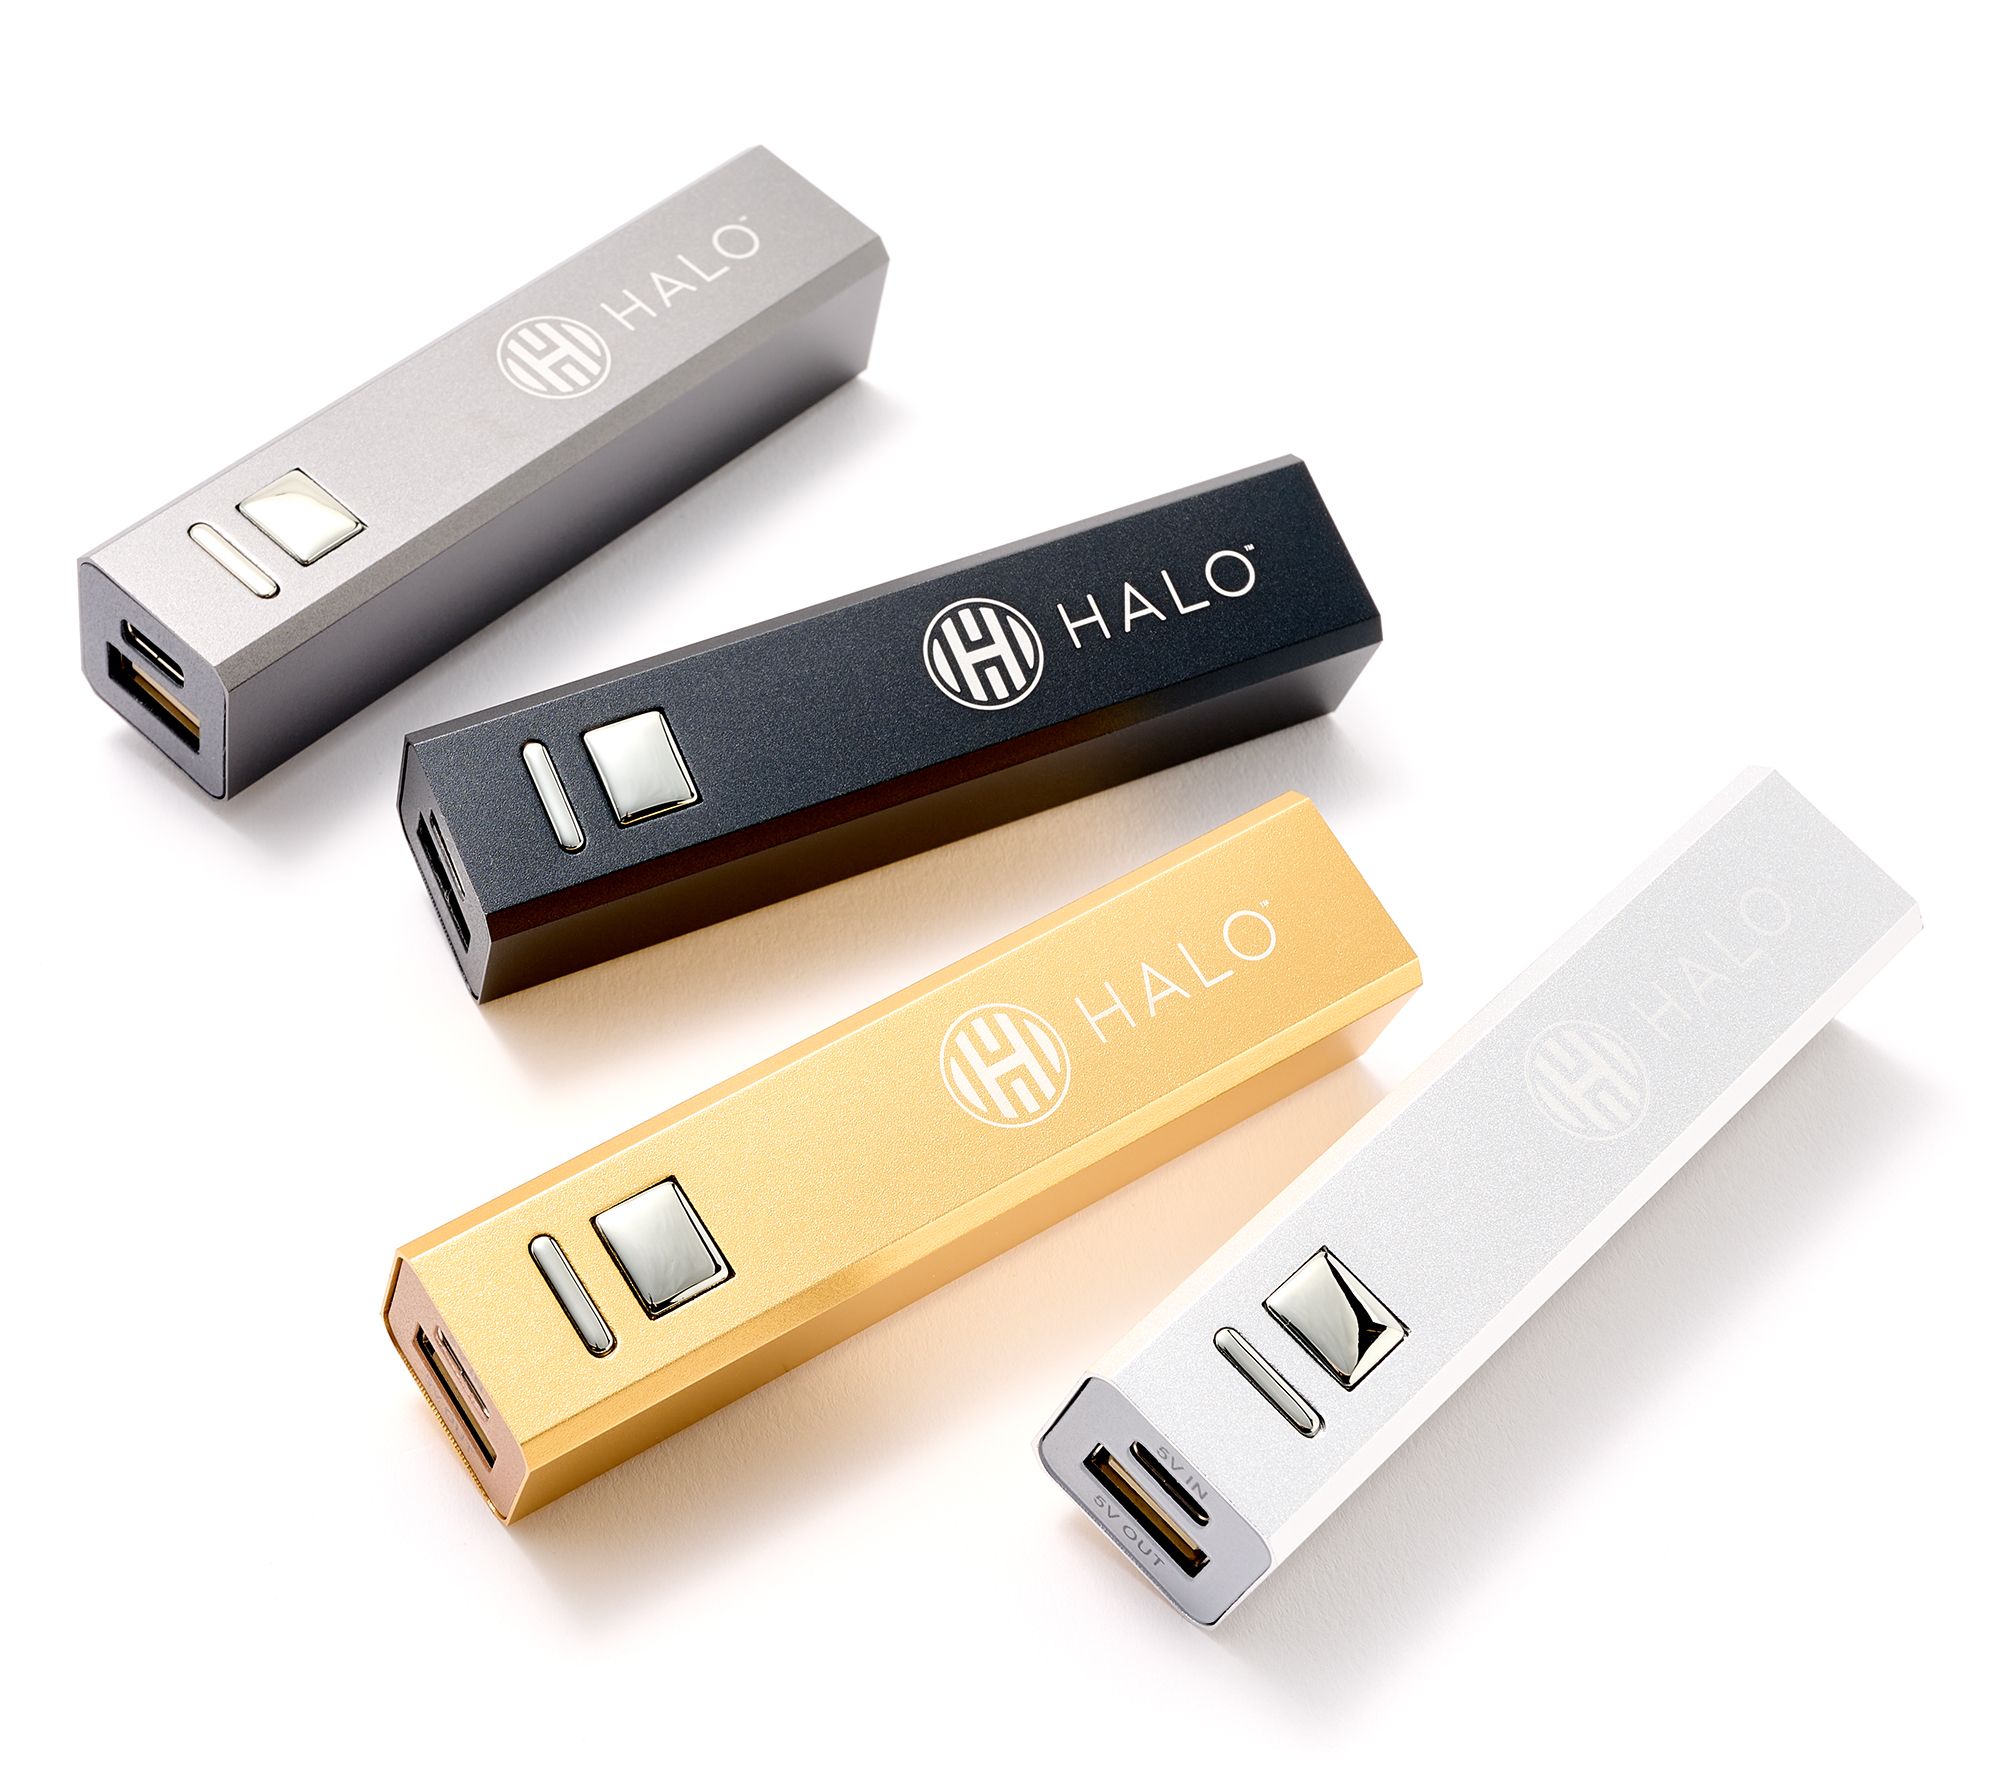 HALO Set of 4 2,200mAh Power Banks with USB-C Cables 